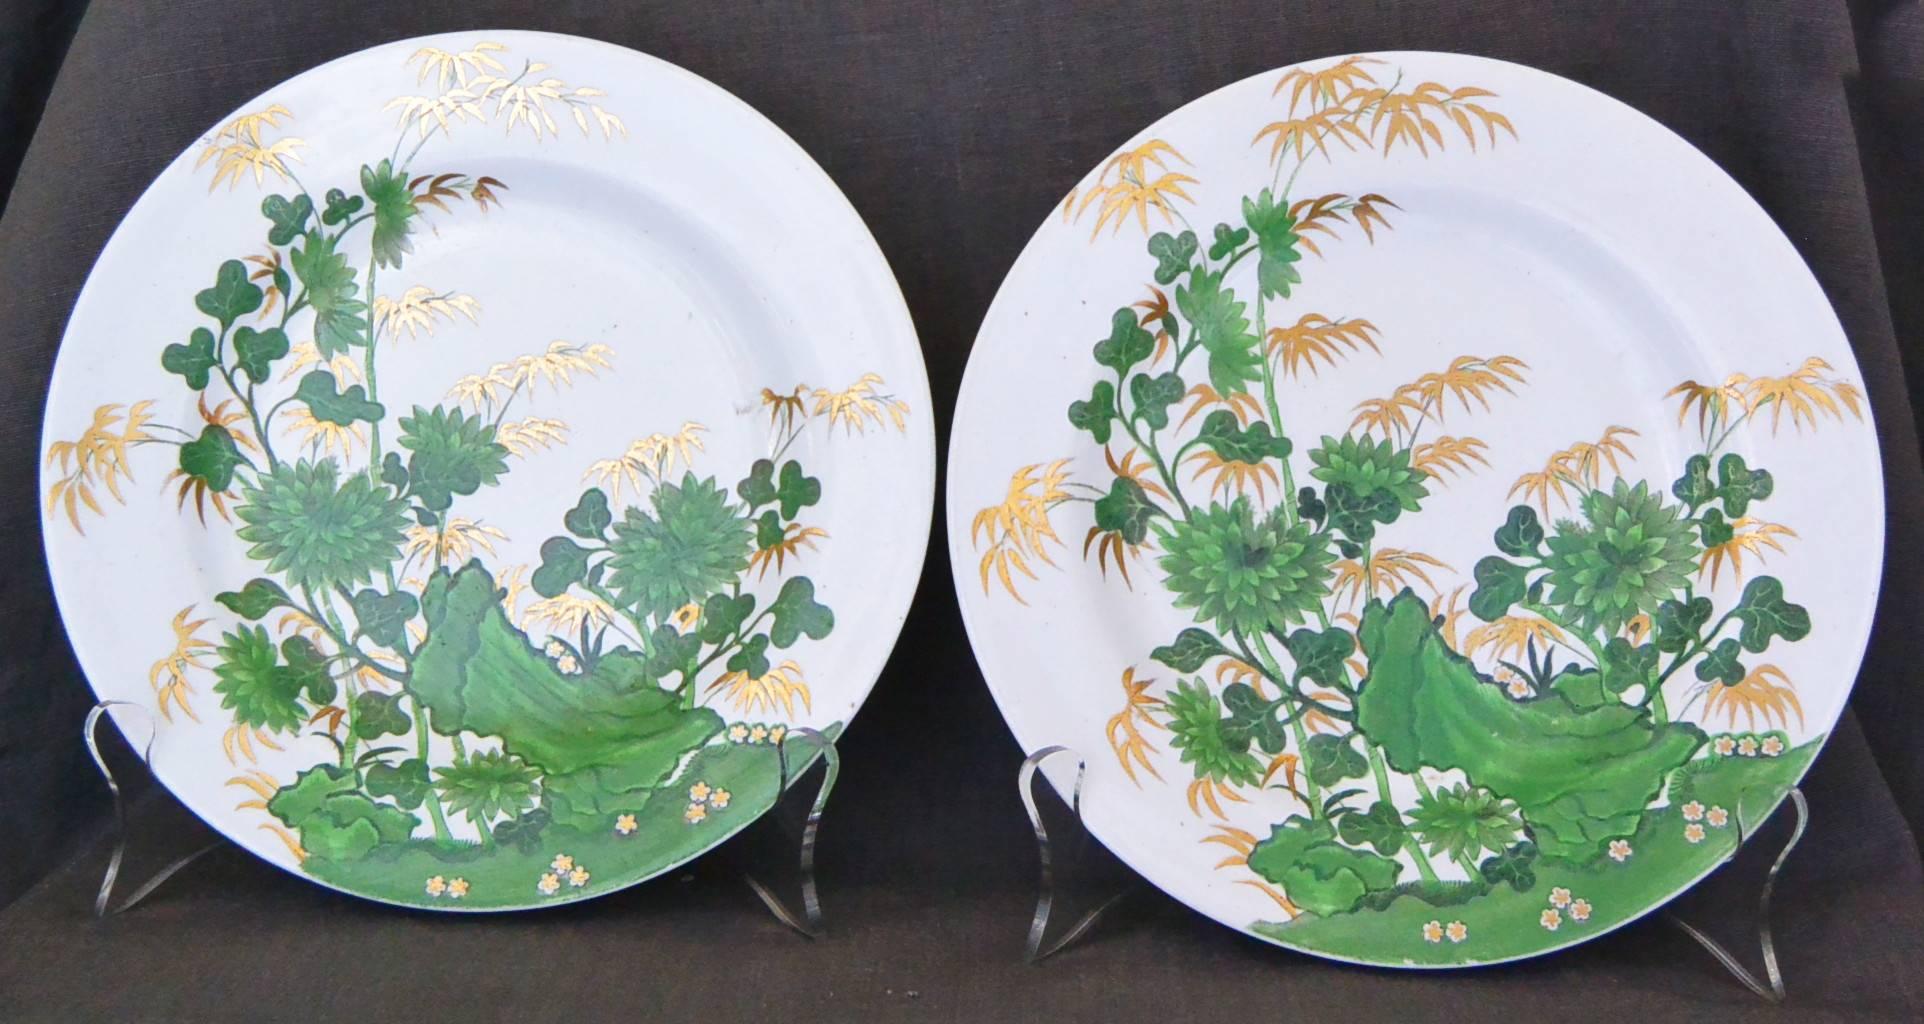 Eight Spode plates in the bamboo and rock pattern #1653; printed in black and painted in translucent green with gilding, England, circa 1810-8120. 
Diameter: 8.5